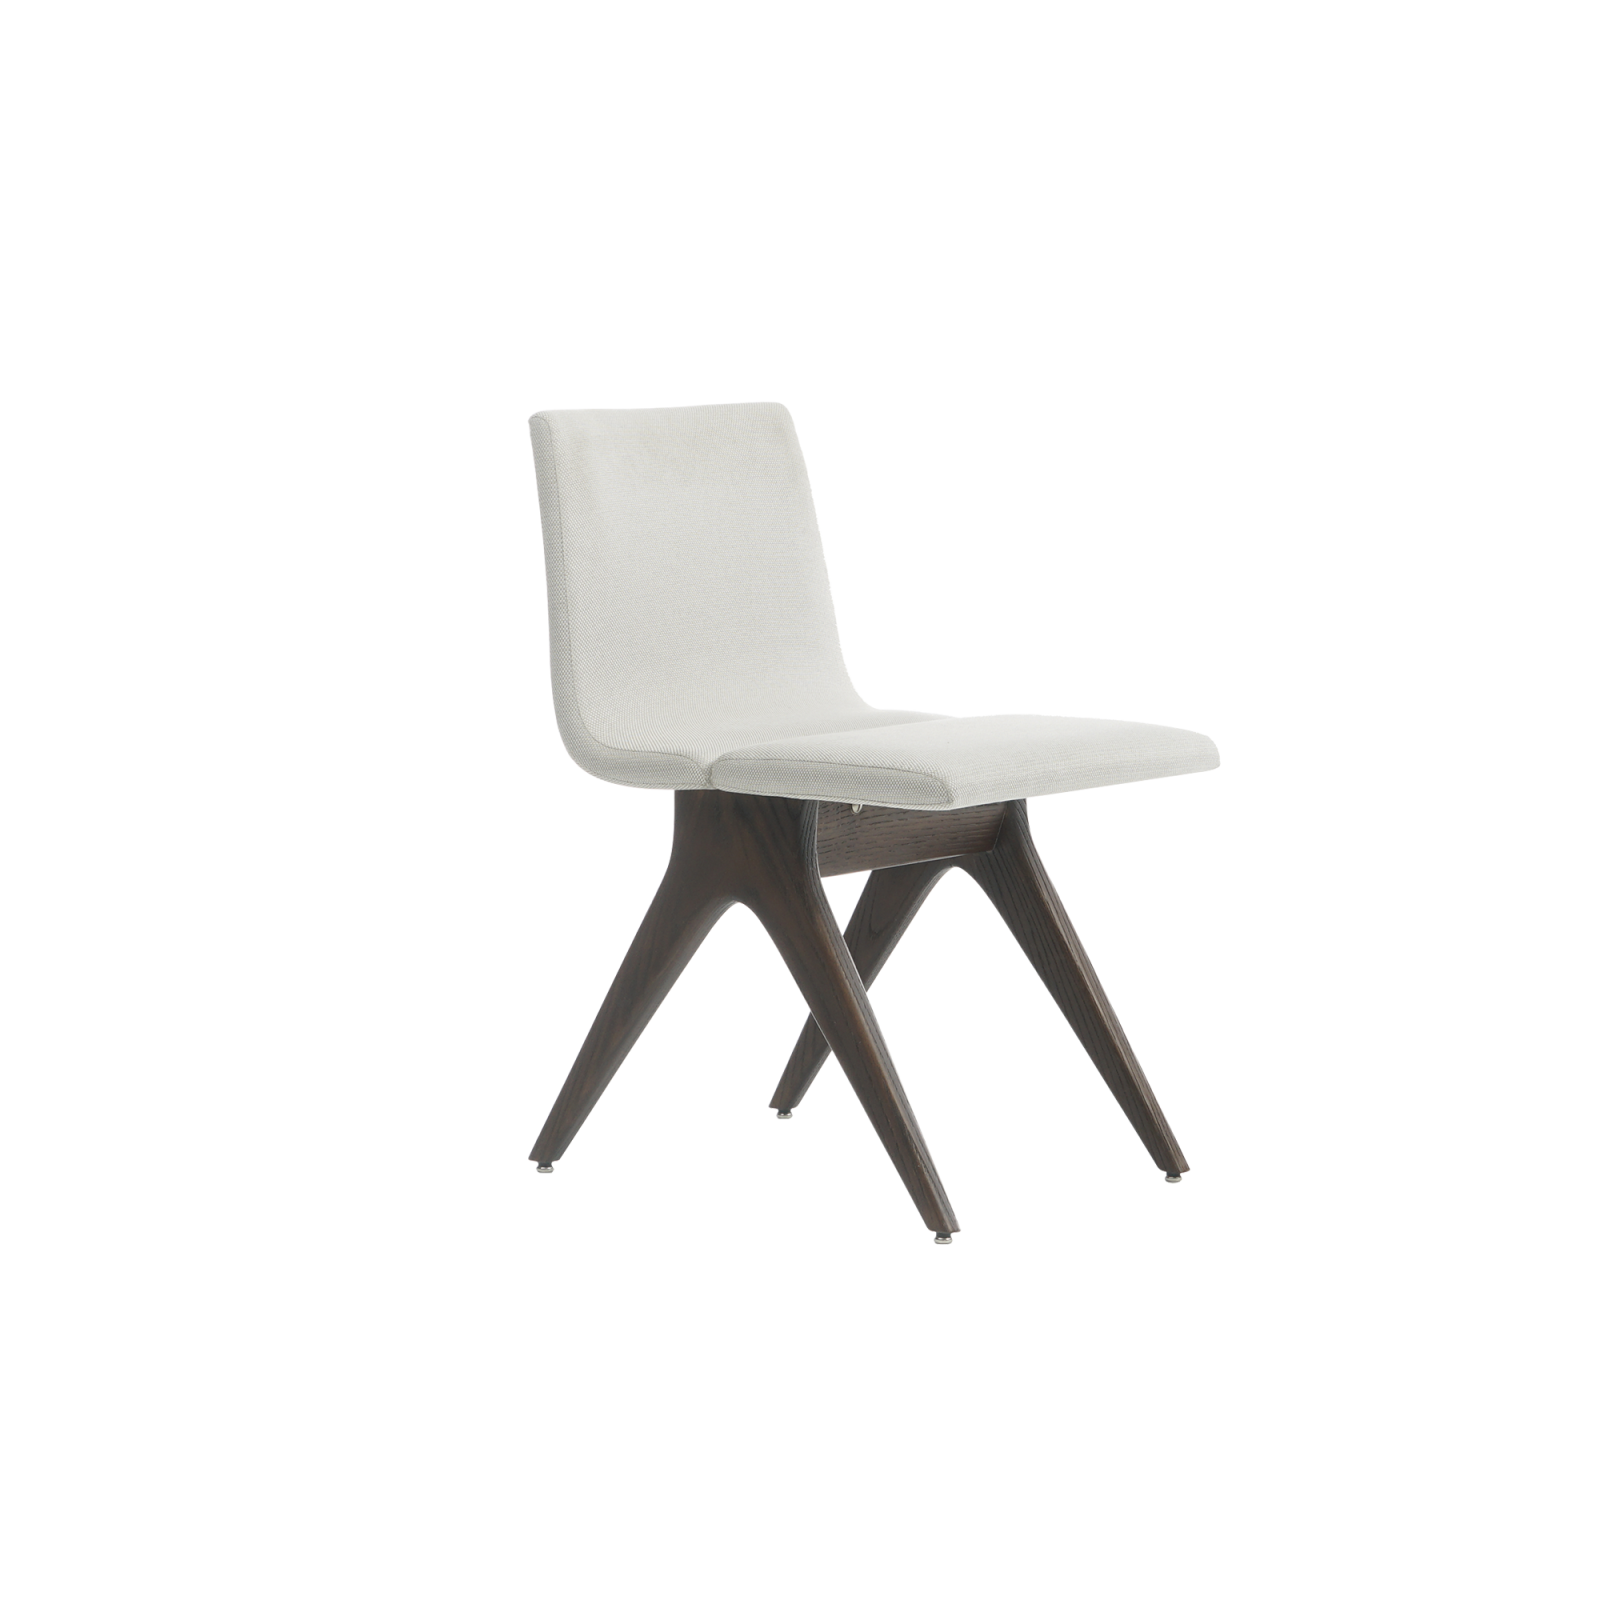 Feel Chair made of soft fabric upholstery and solid walnut